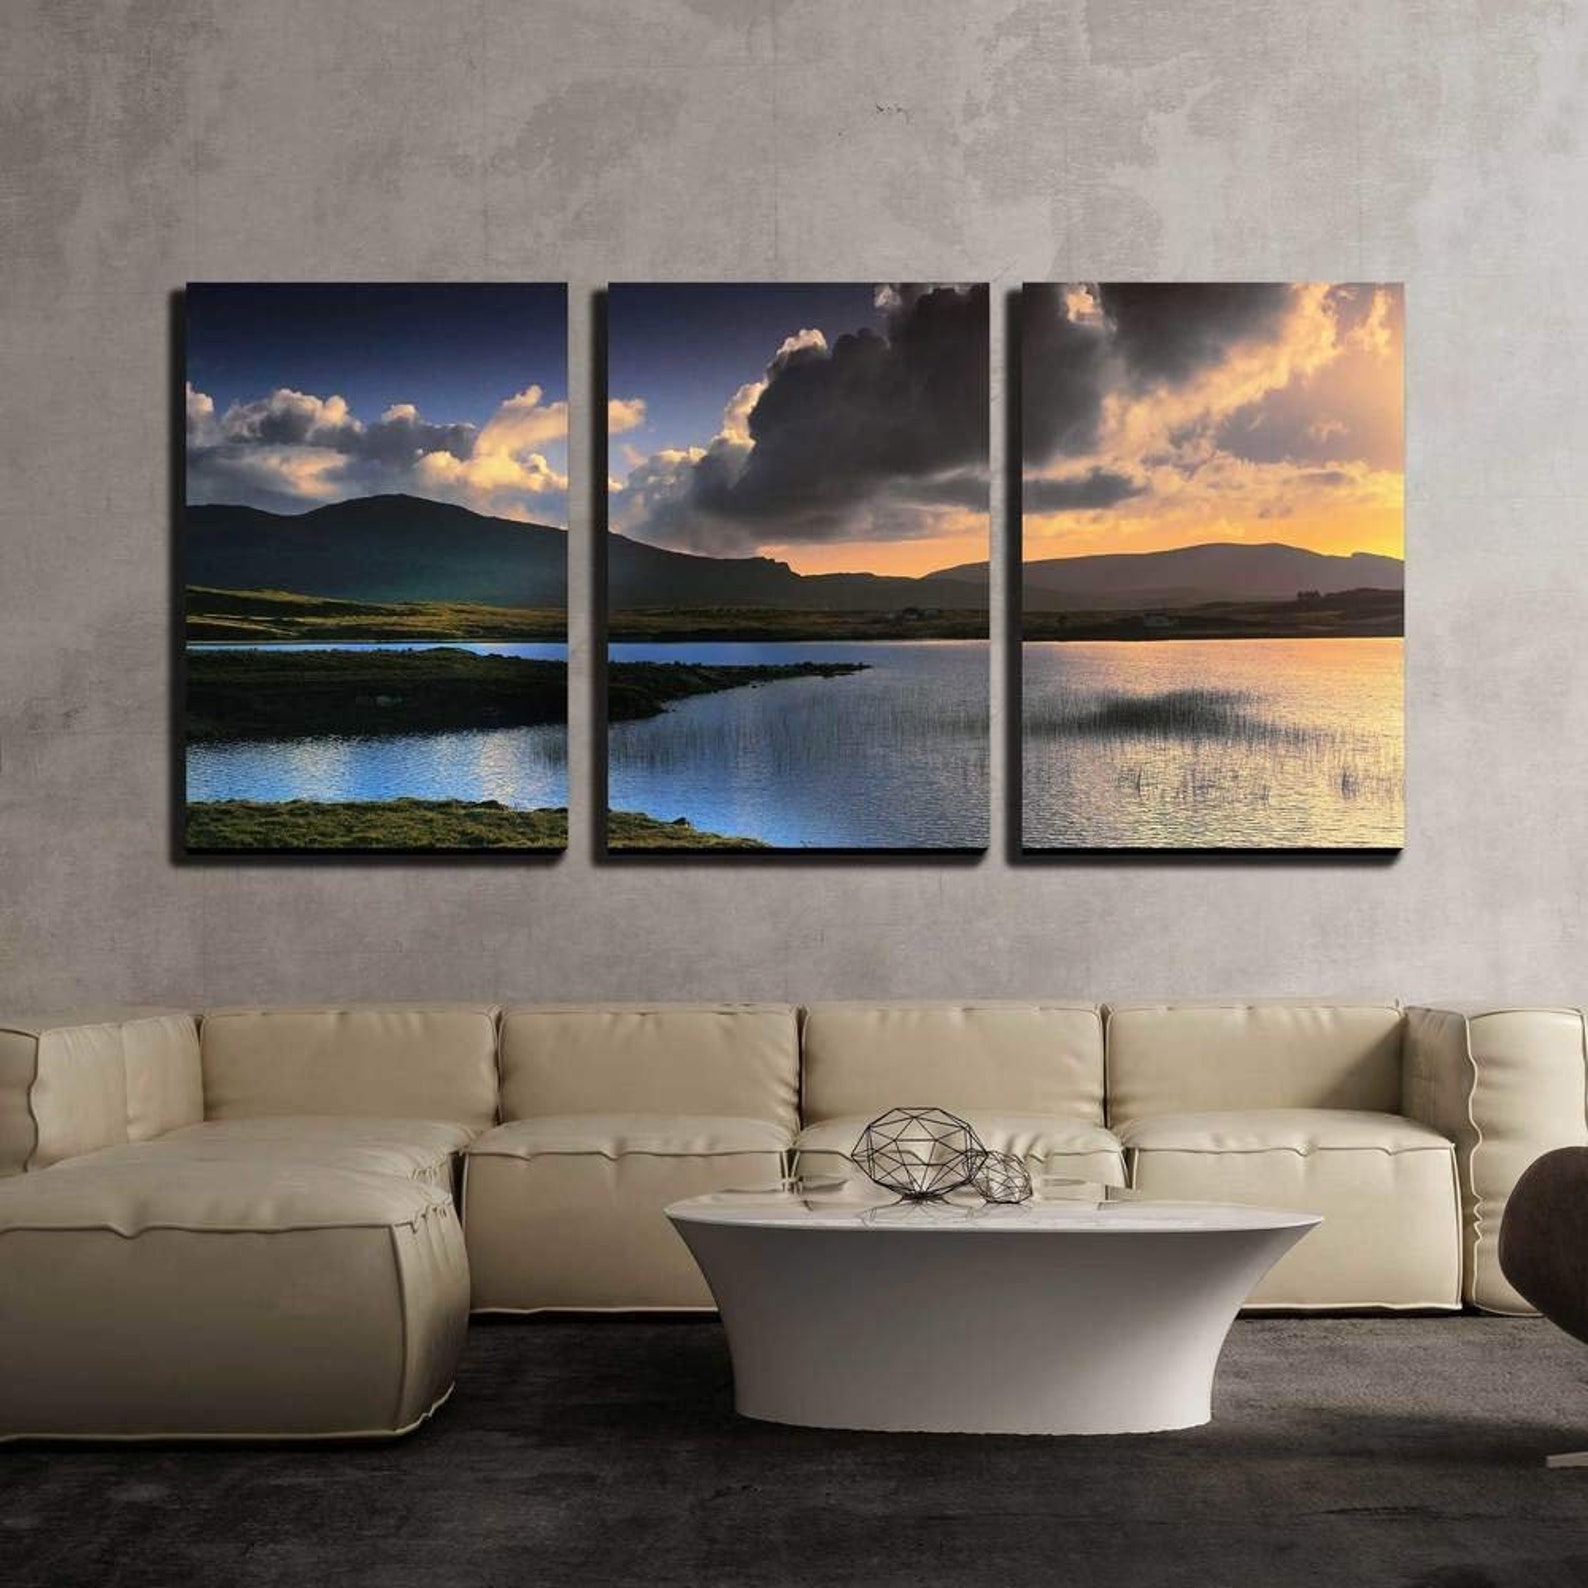 Wall26 3 Piece Canvas Wall Art the Isle of Skye in | Etsy